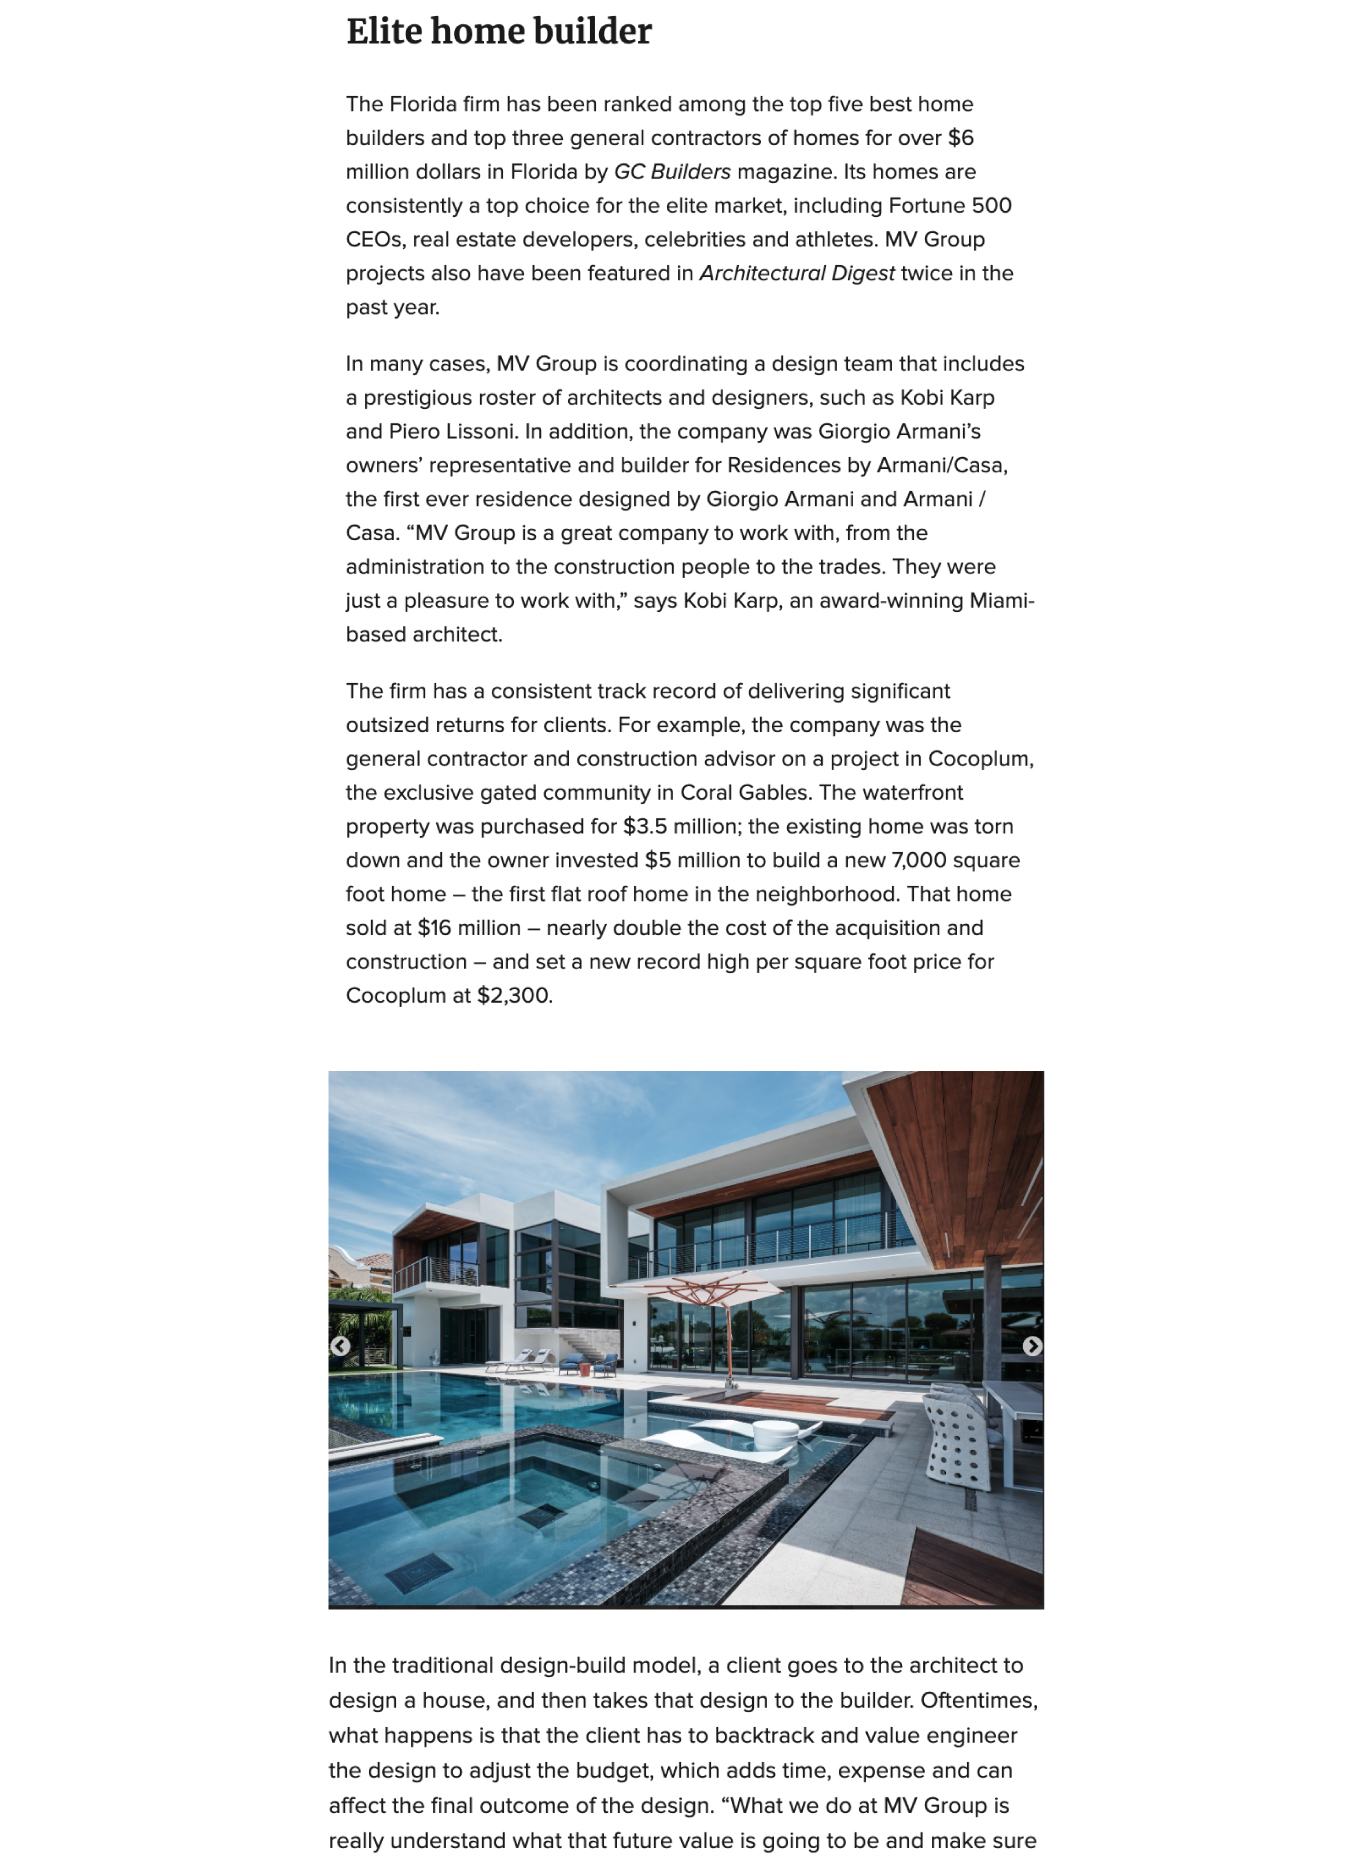 MV Group magnifies luxury home values for clients in South Florida